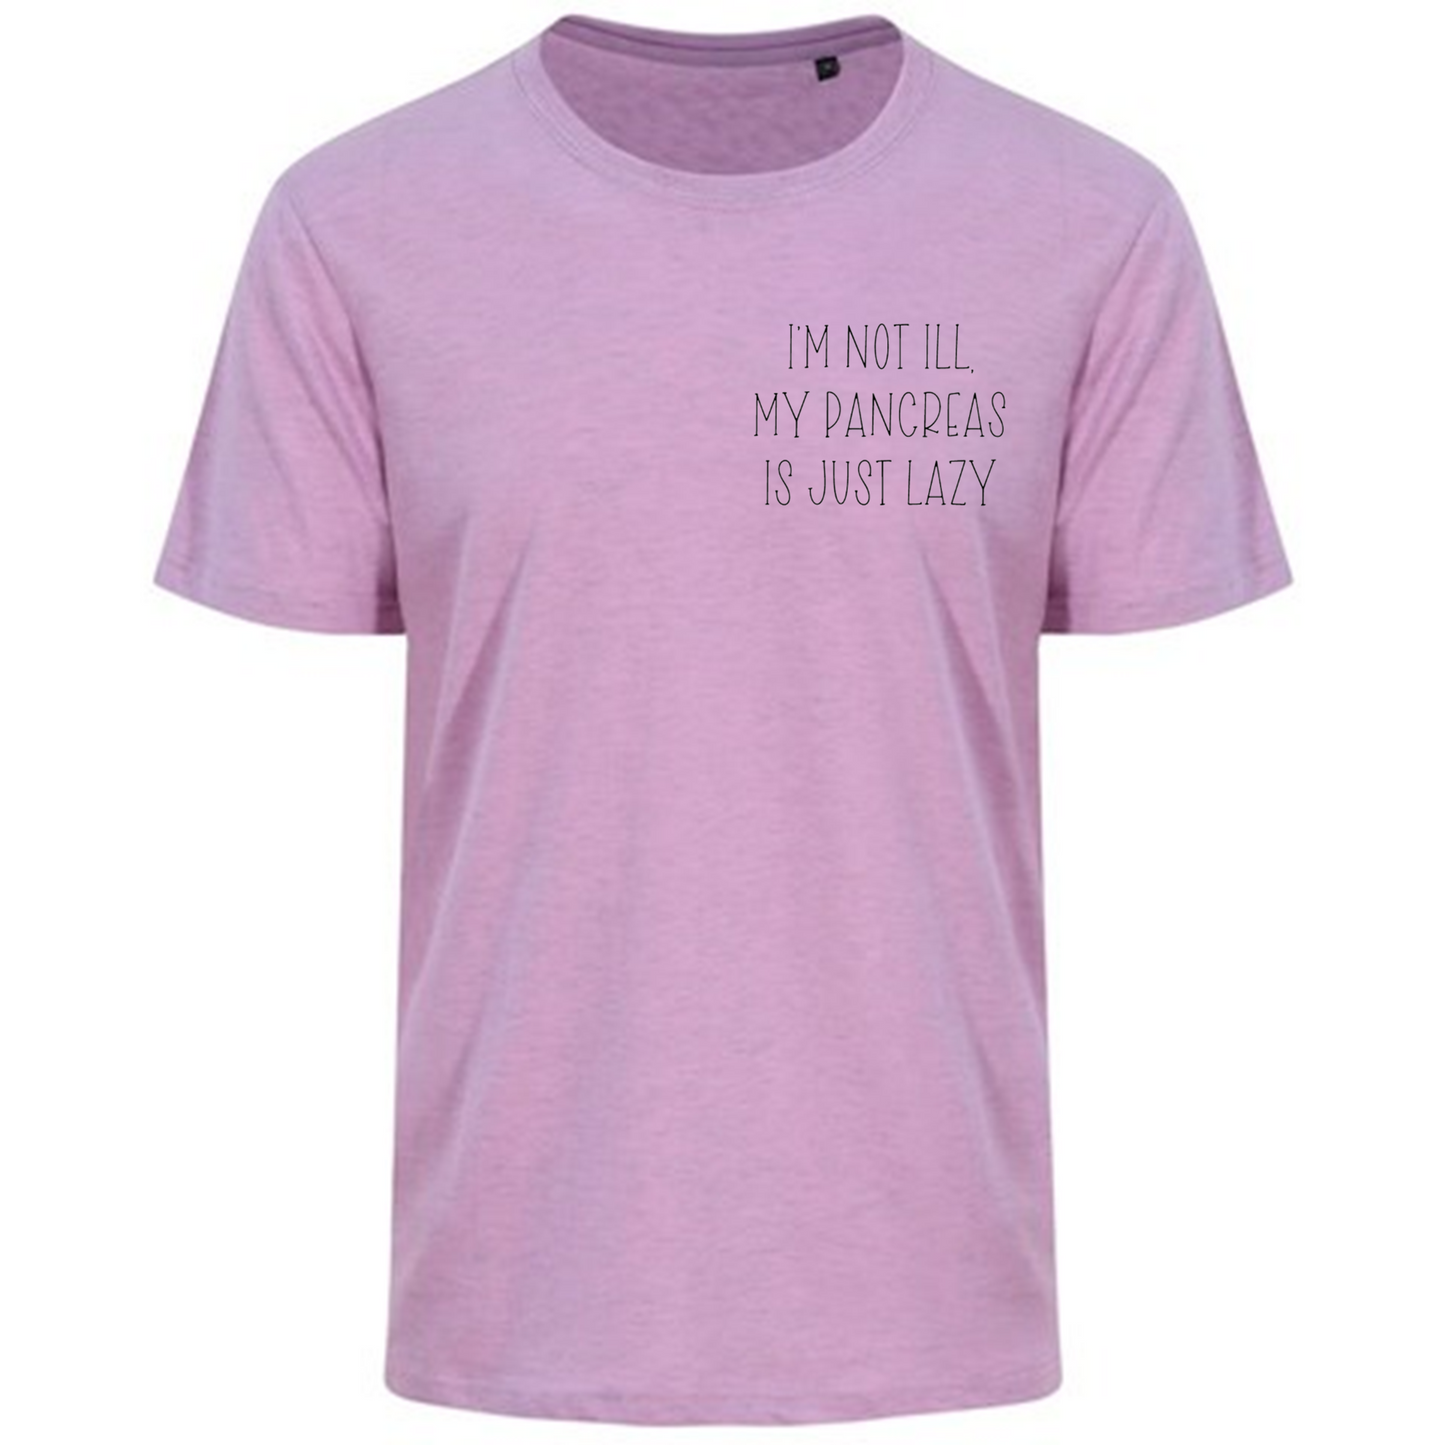 I'm Not Ill, My Pancreas Is Just Lazy Pastel T-Shirt